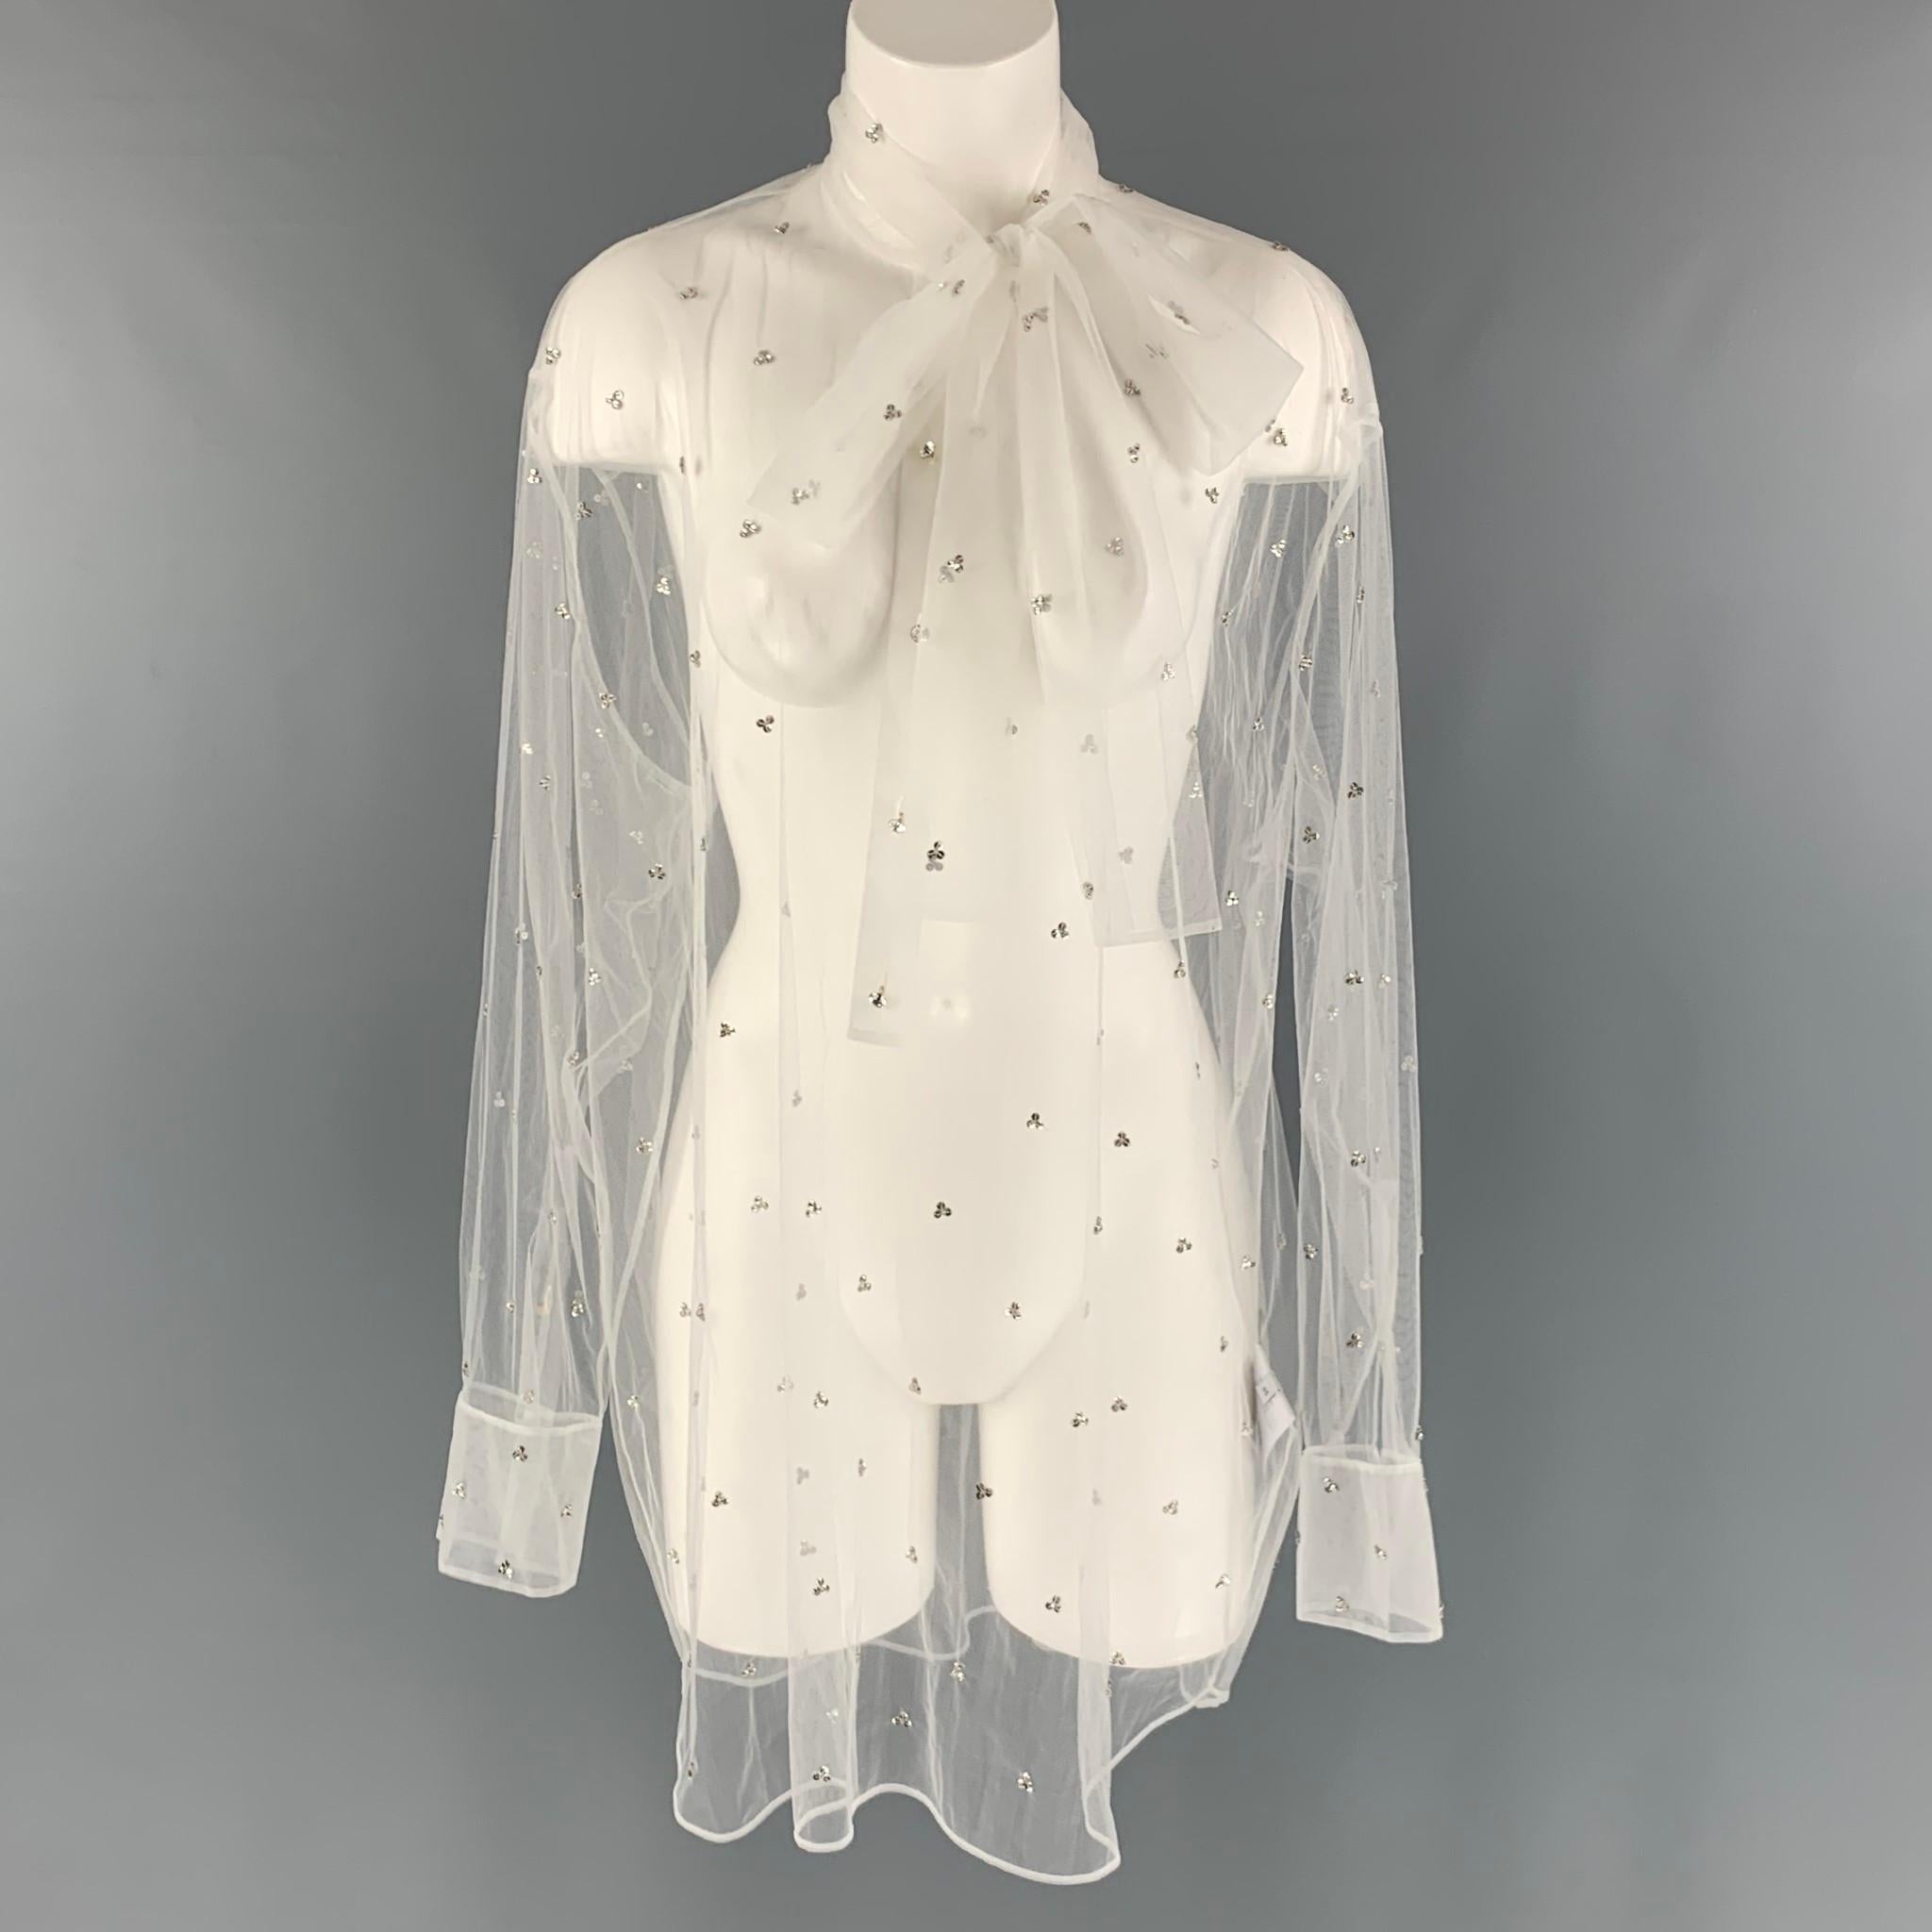 VALENTINO blouse comes in a white mesh material featuring an oversized fit, embroidery crystals, see through style, neck tie and a button up closure. Made in Italy.

Excellent Pre-Owned Condition.
Marked: 48

Measurements:

Shoulder: 20 in.
Bust: 54